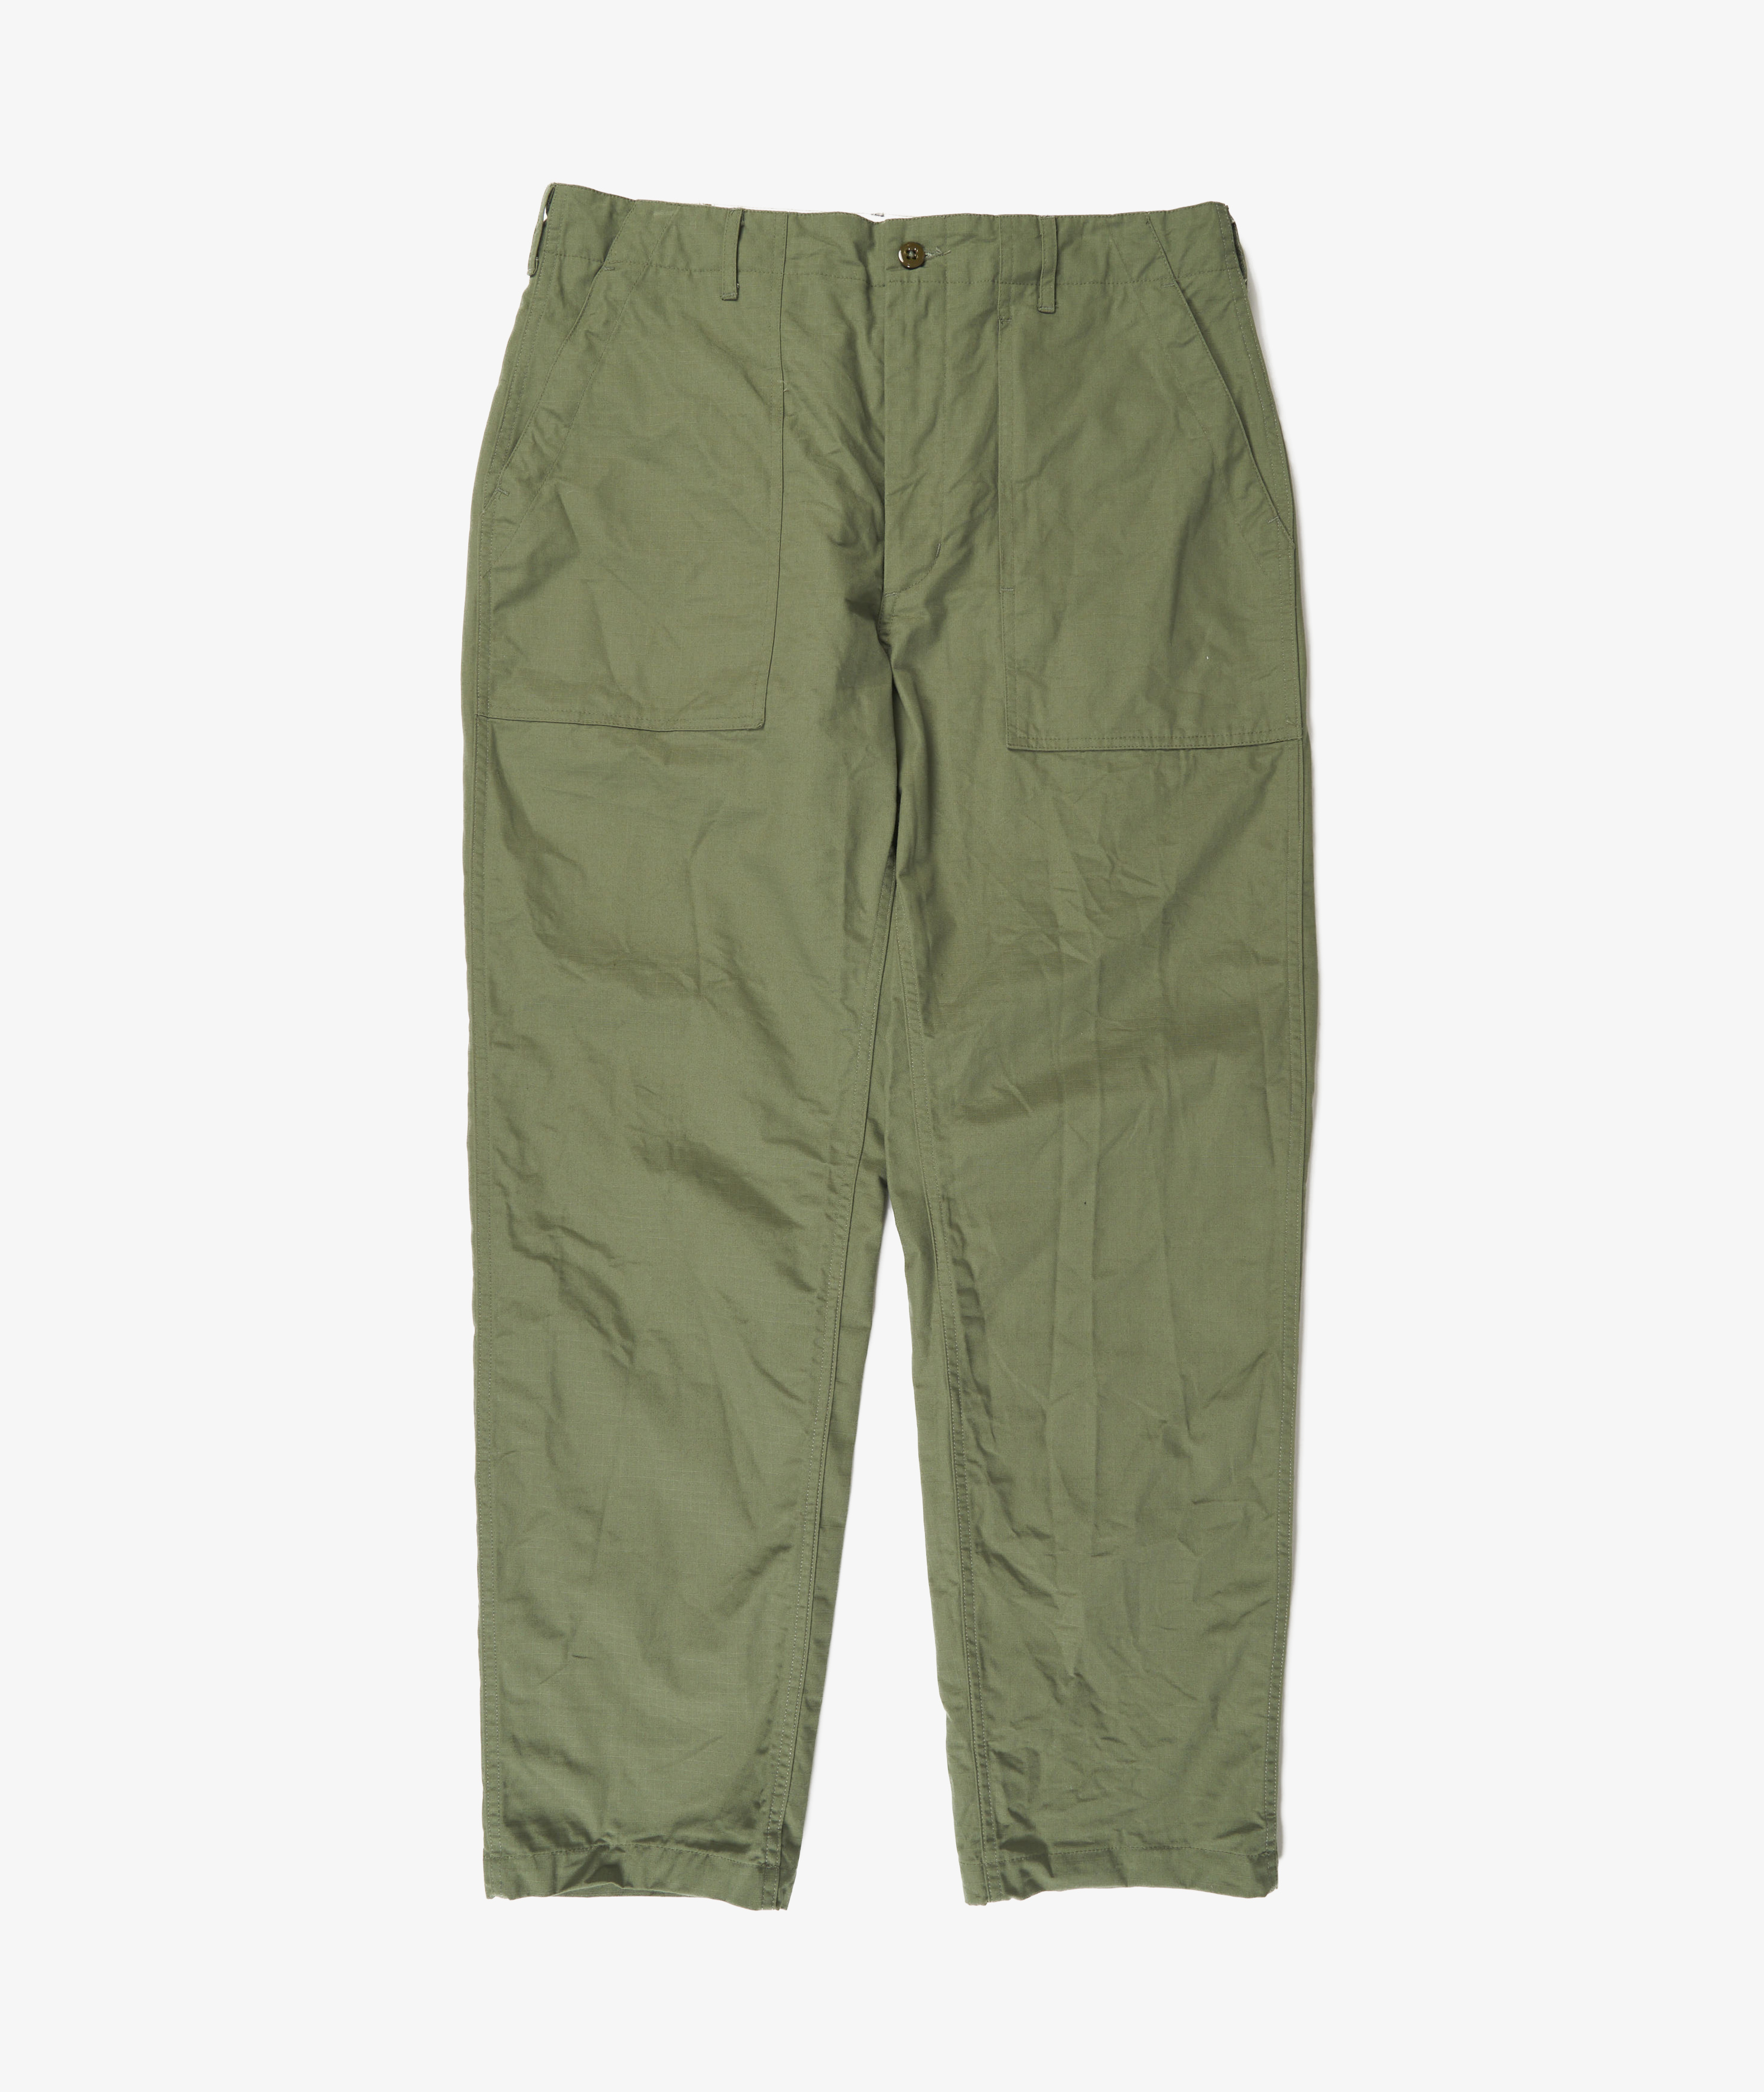 Norse Store  Shipping Worldwide - Engineered Garments Ripstop Fatigue Pant  - Olive